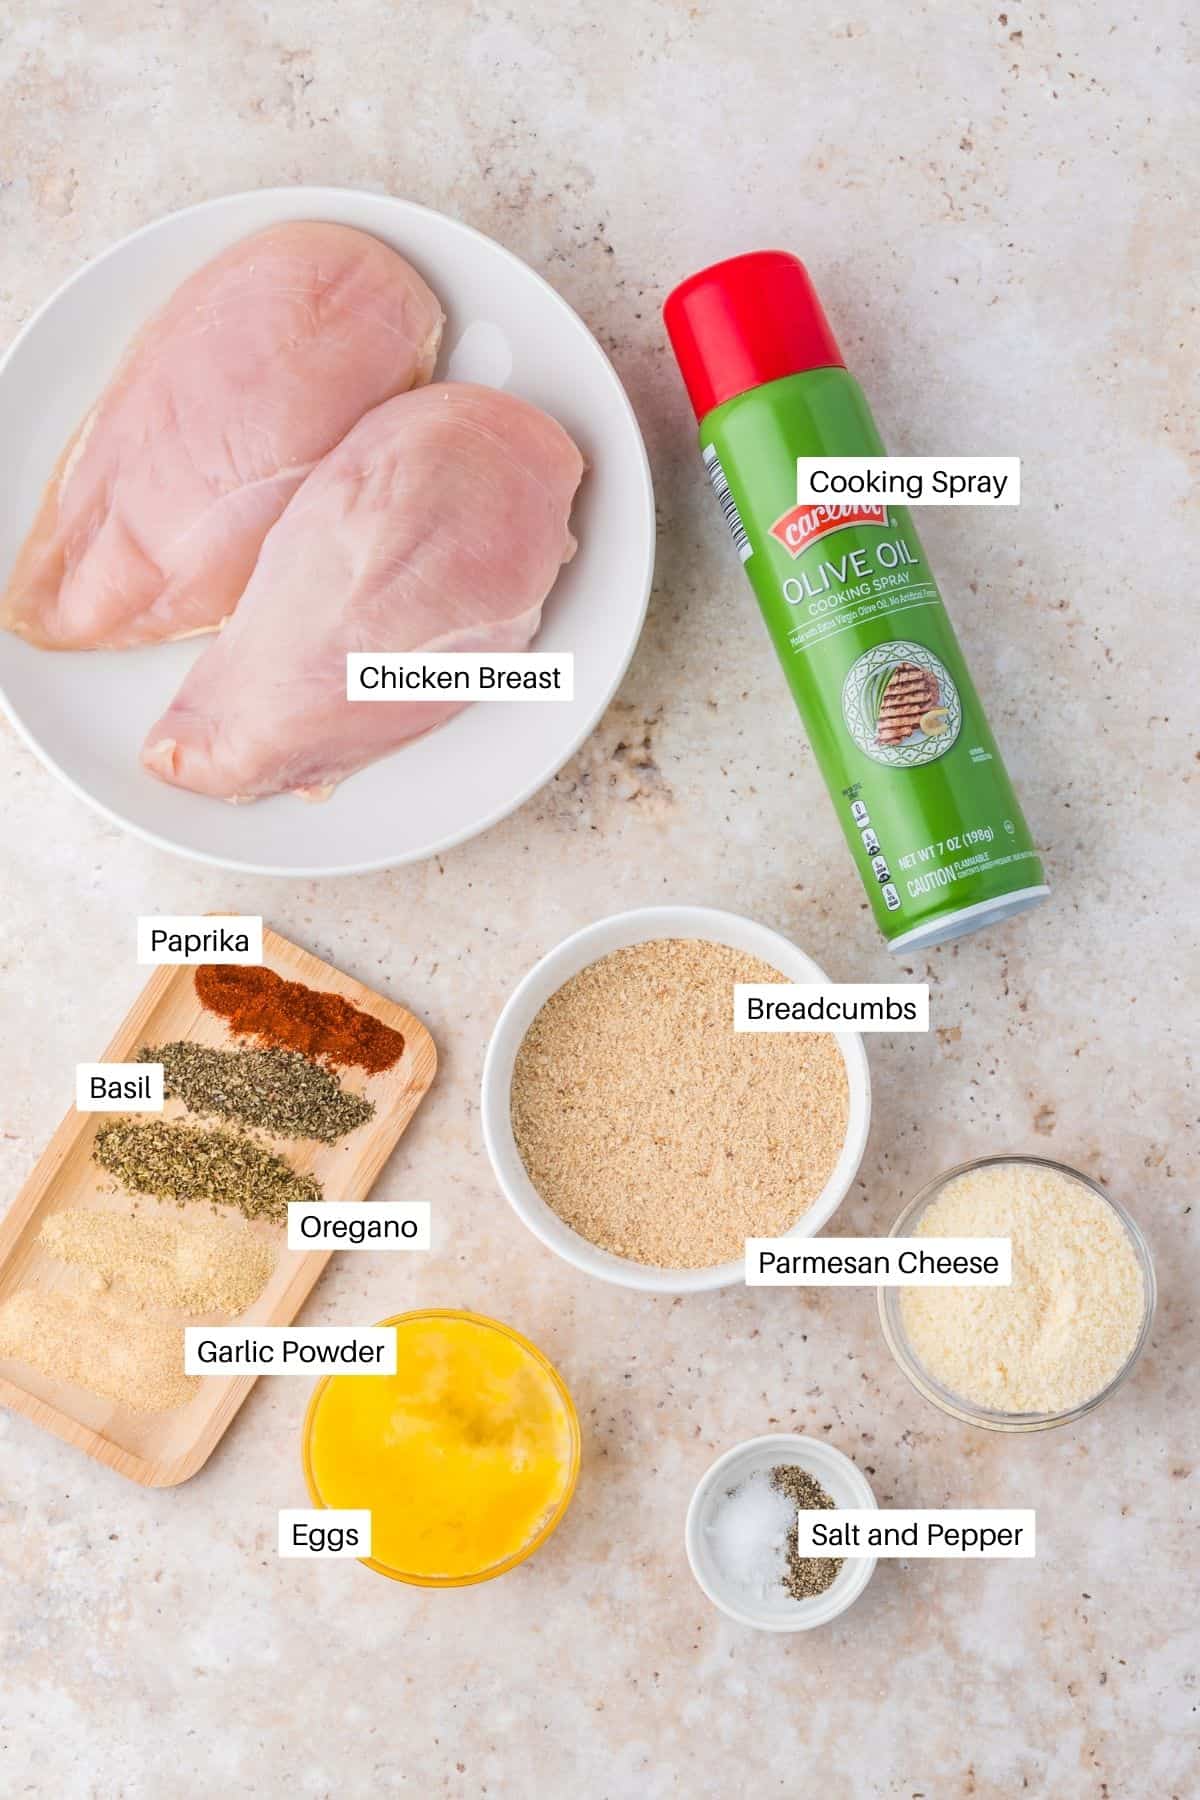 Chicken breast, olive oil spray, breadcrumbs, parmesan cheese, eggs, salt and pepper, garlic and onion powder, basil, oregano and paprika for the chicken cutlets. 